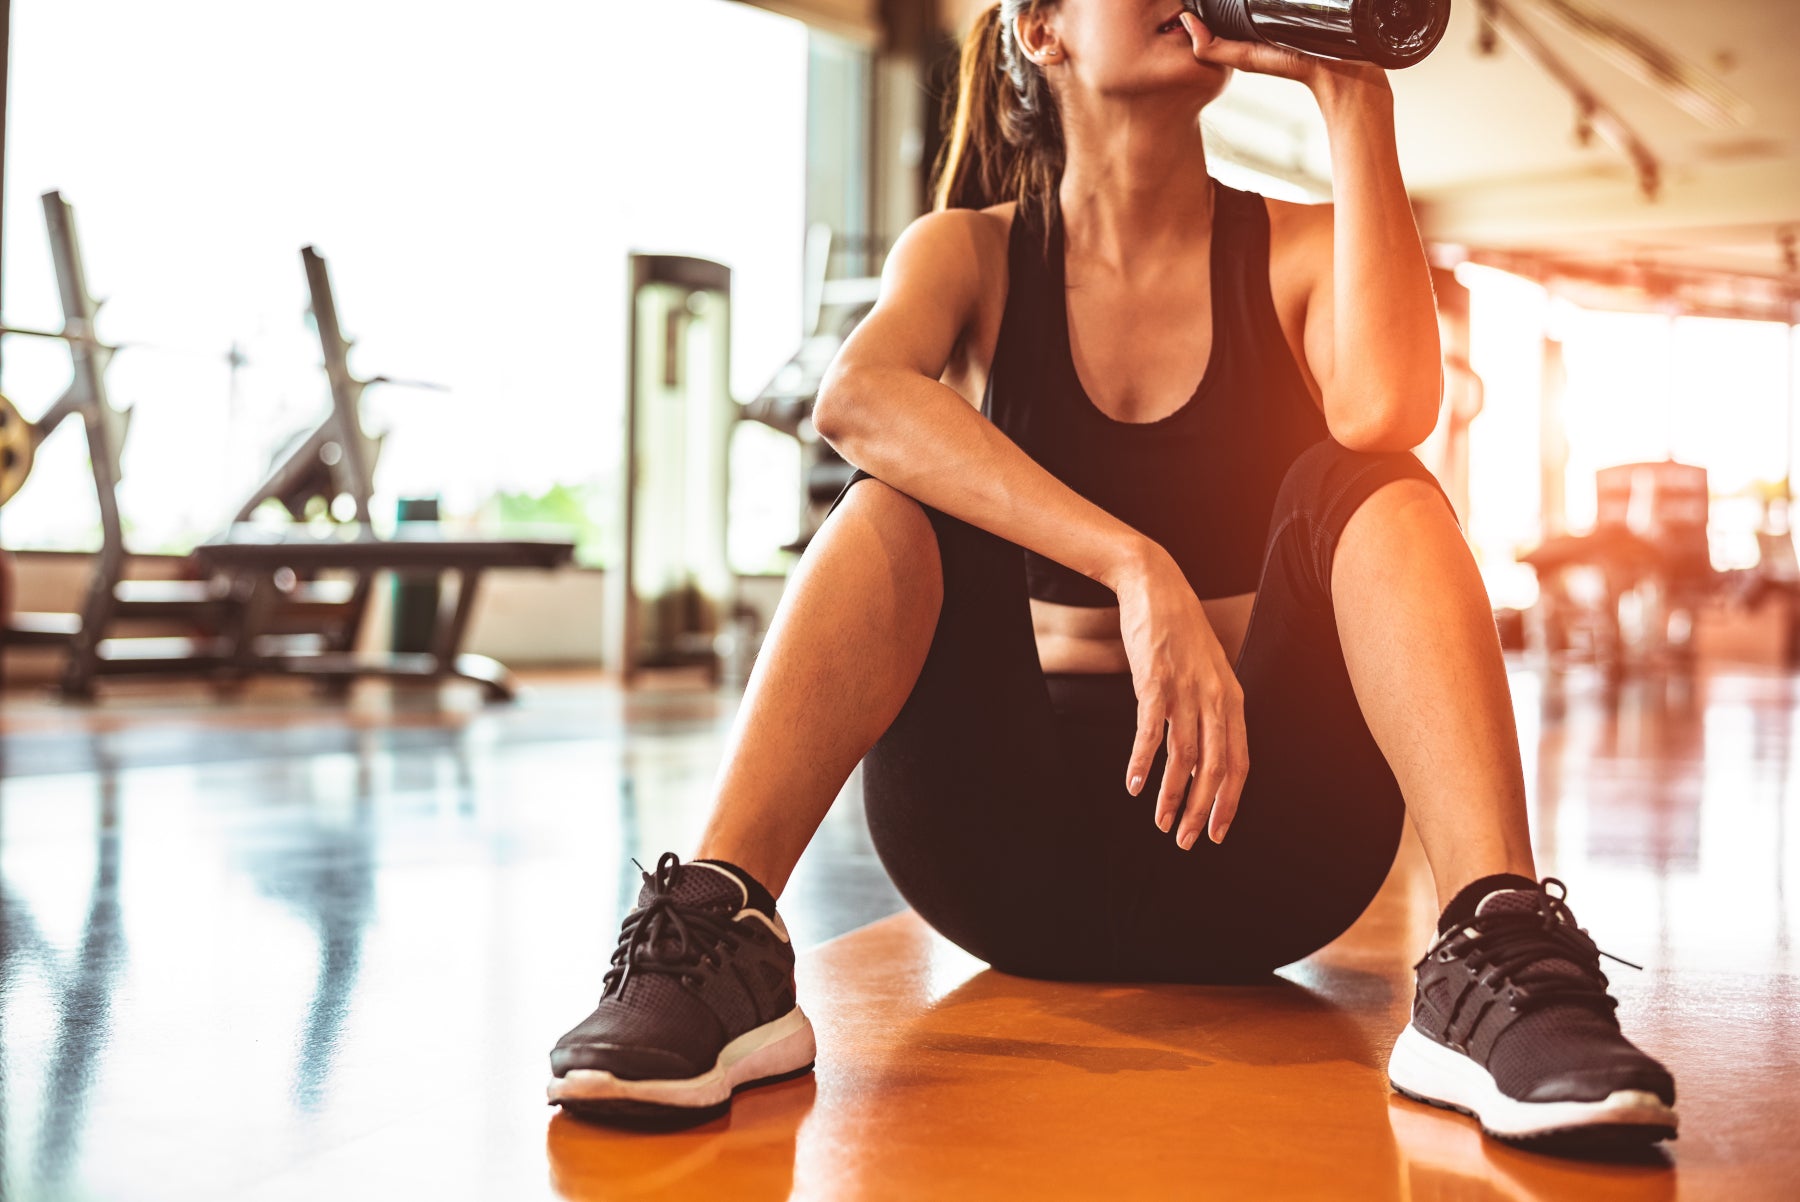 Woman resting and drinking from bottle after a workout